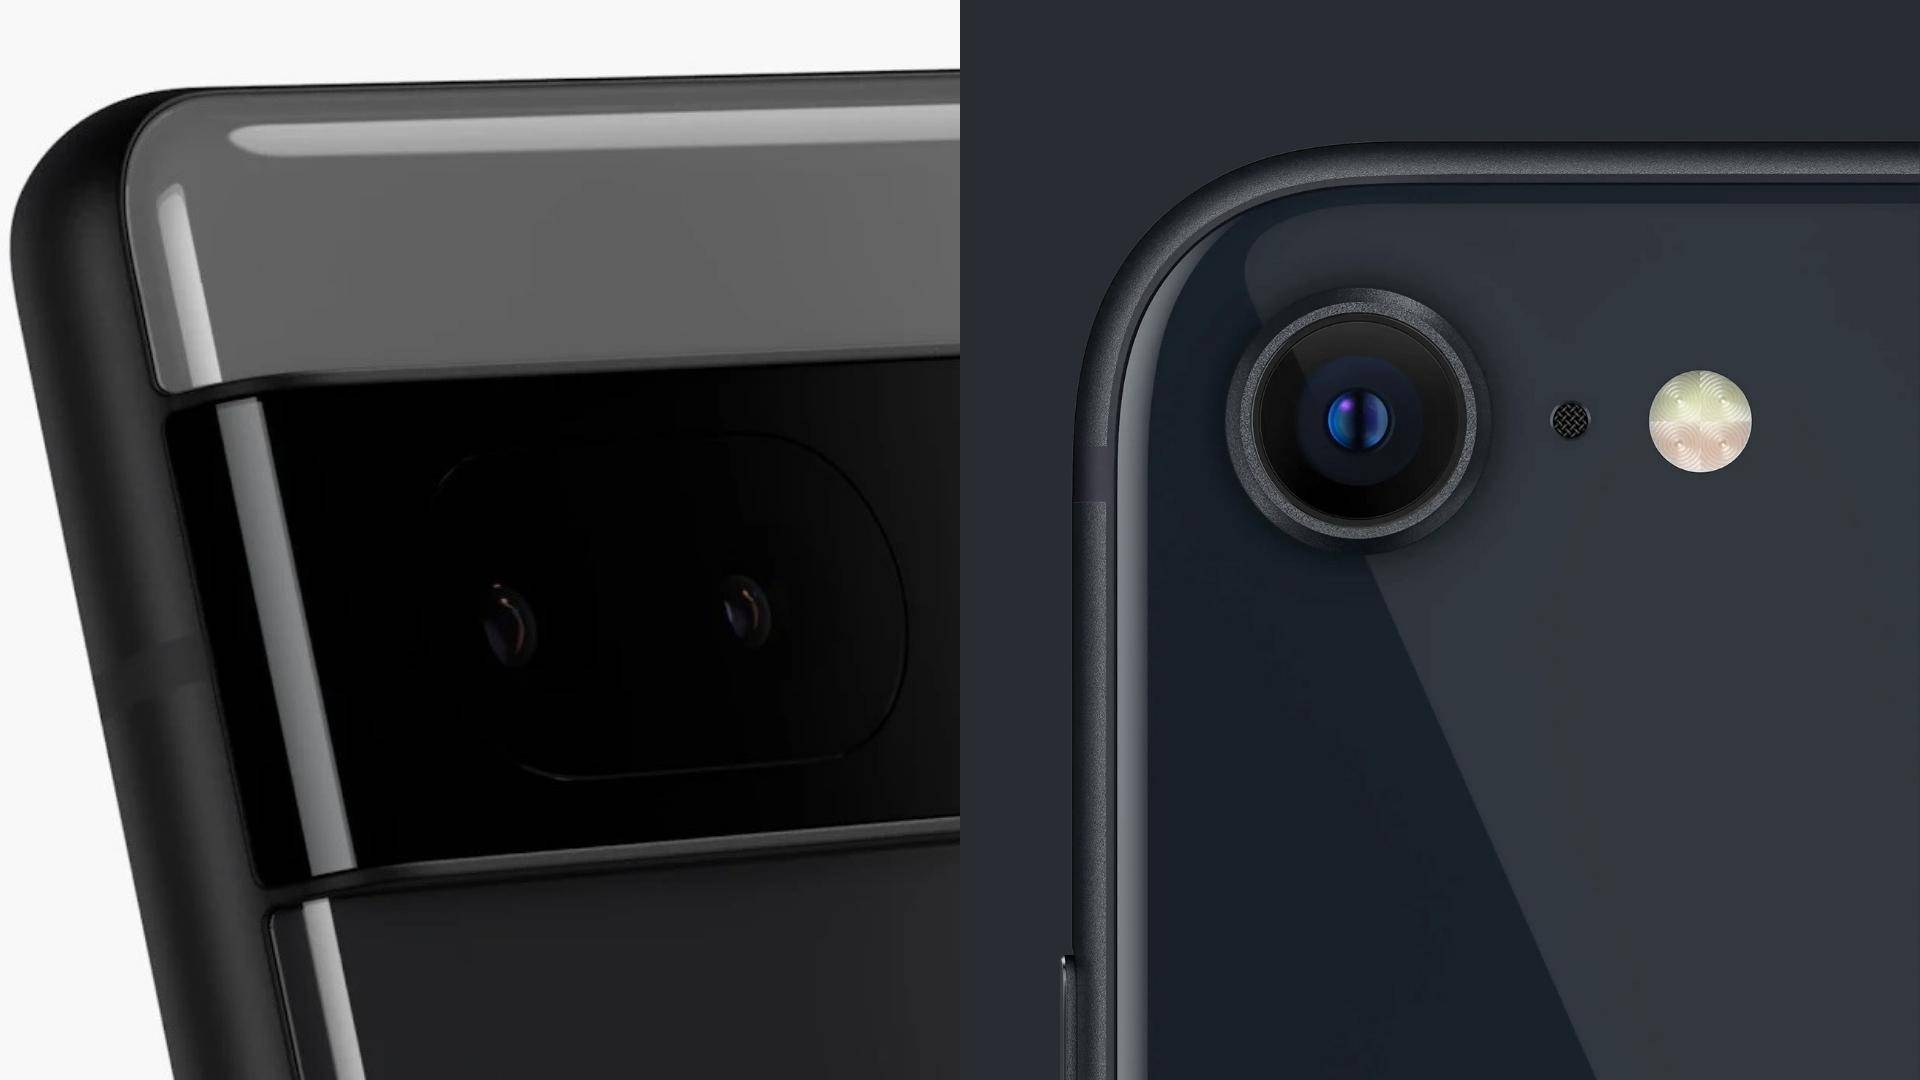 Camera Array on Pixel 6a put up against Camera Array on iPhone SE 2022